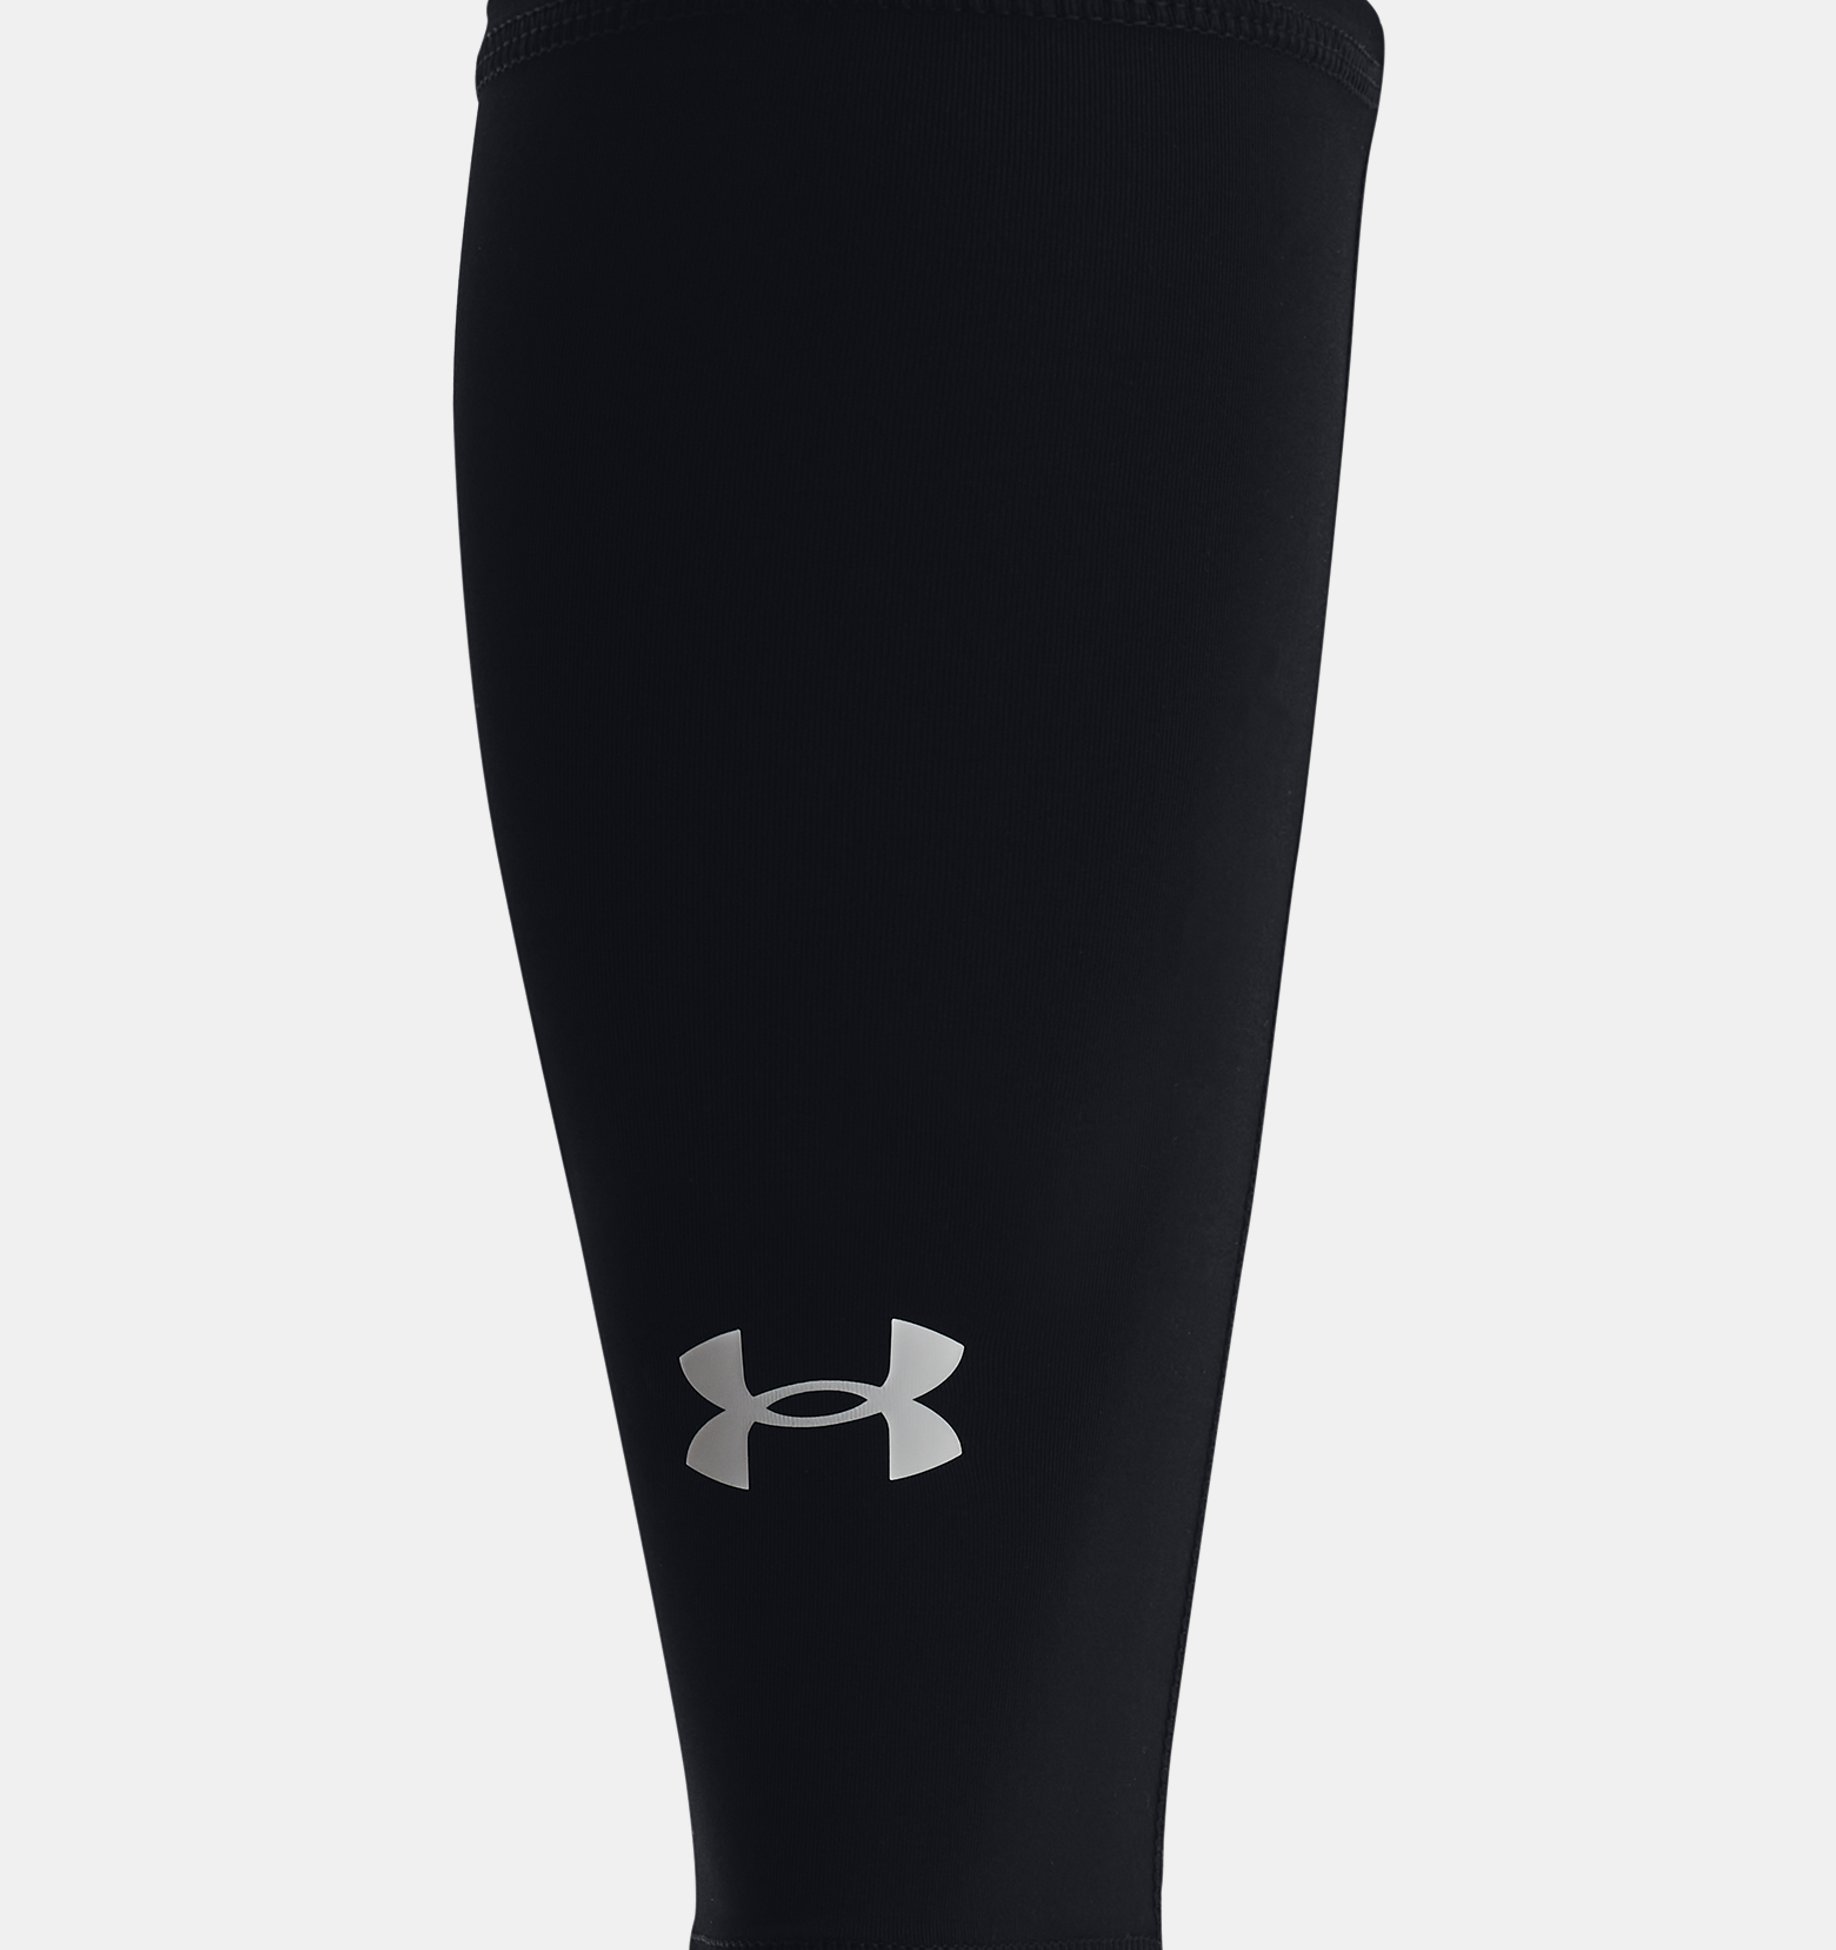 https://underarmour.scene7.com/is/image/Underarmour/1380014-001_SLB_SL?rp=standard-0pad|pdpZoomDesktop&scl=0.85&fmt=jpg&qlt=85&resMode=sharp2&cache=on,on&bgc=f0f0f0&wid=1836&hei=1950&size=1500,1500